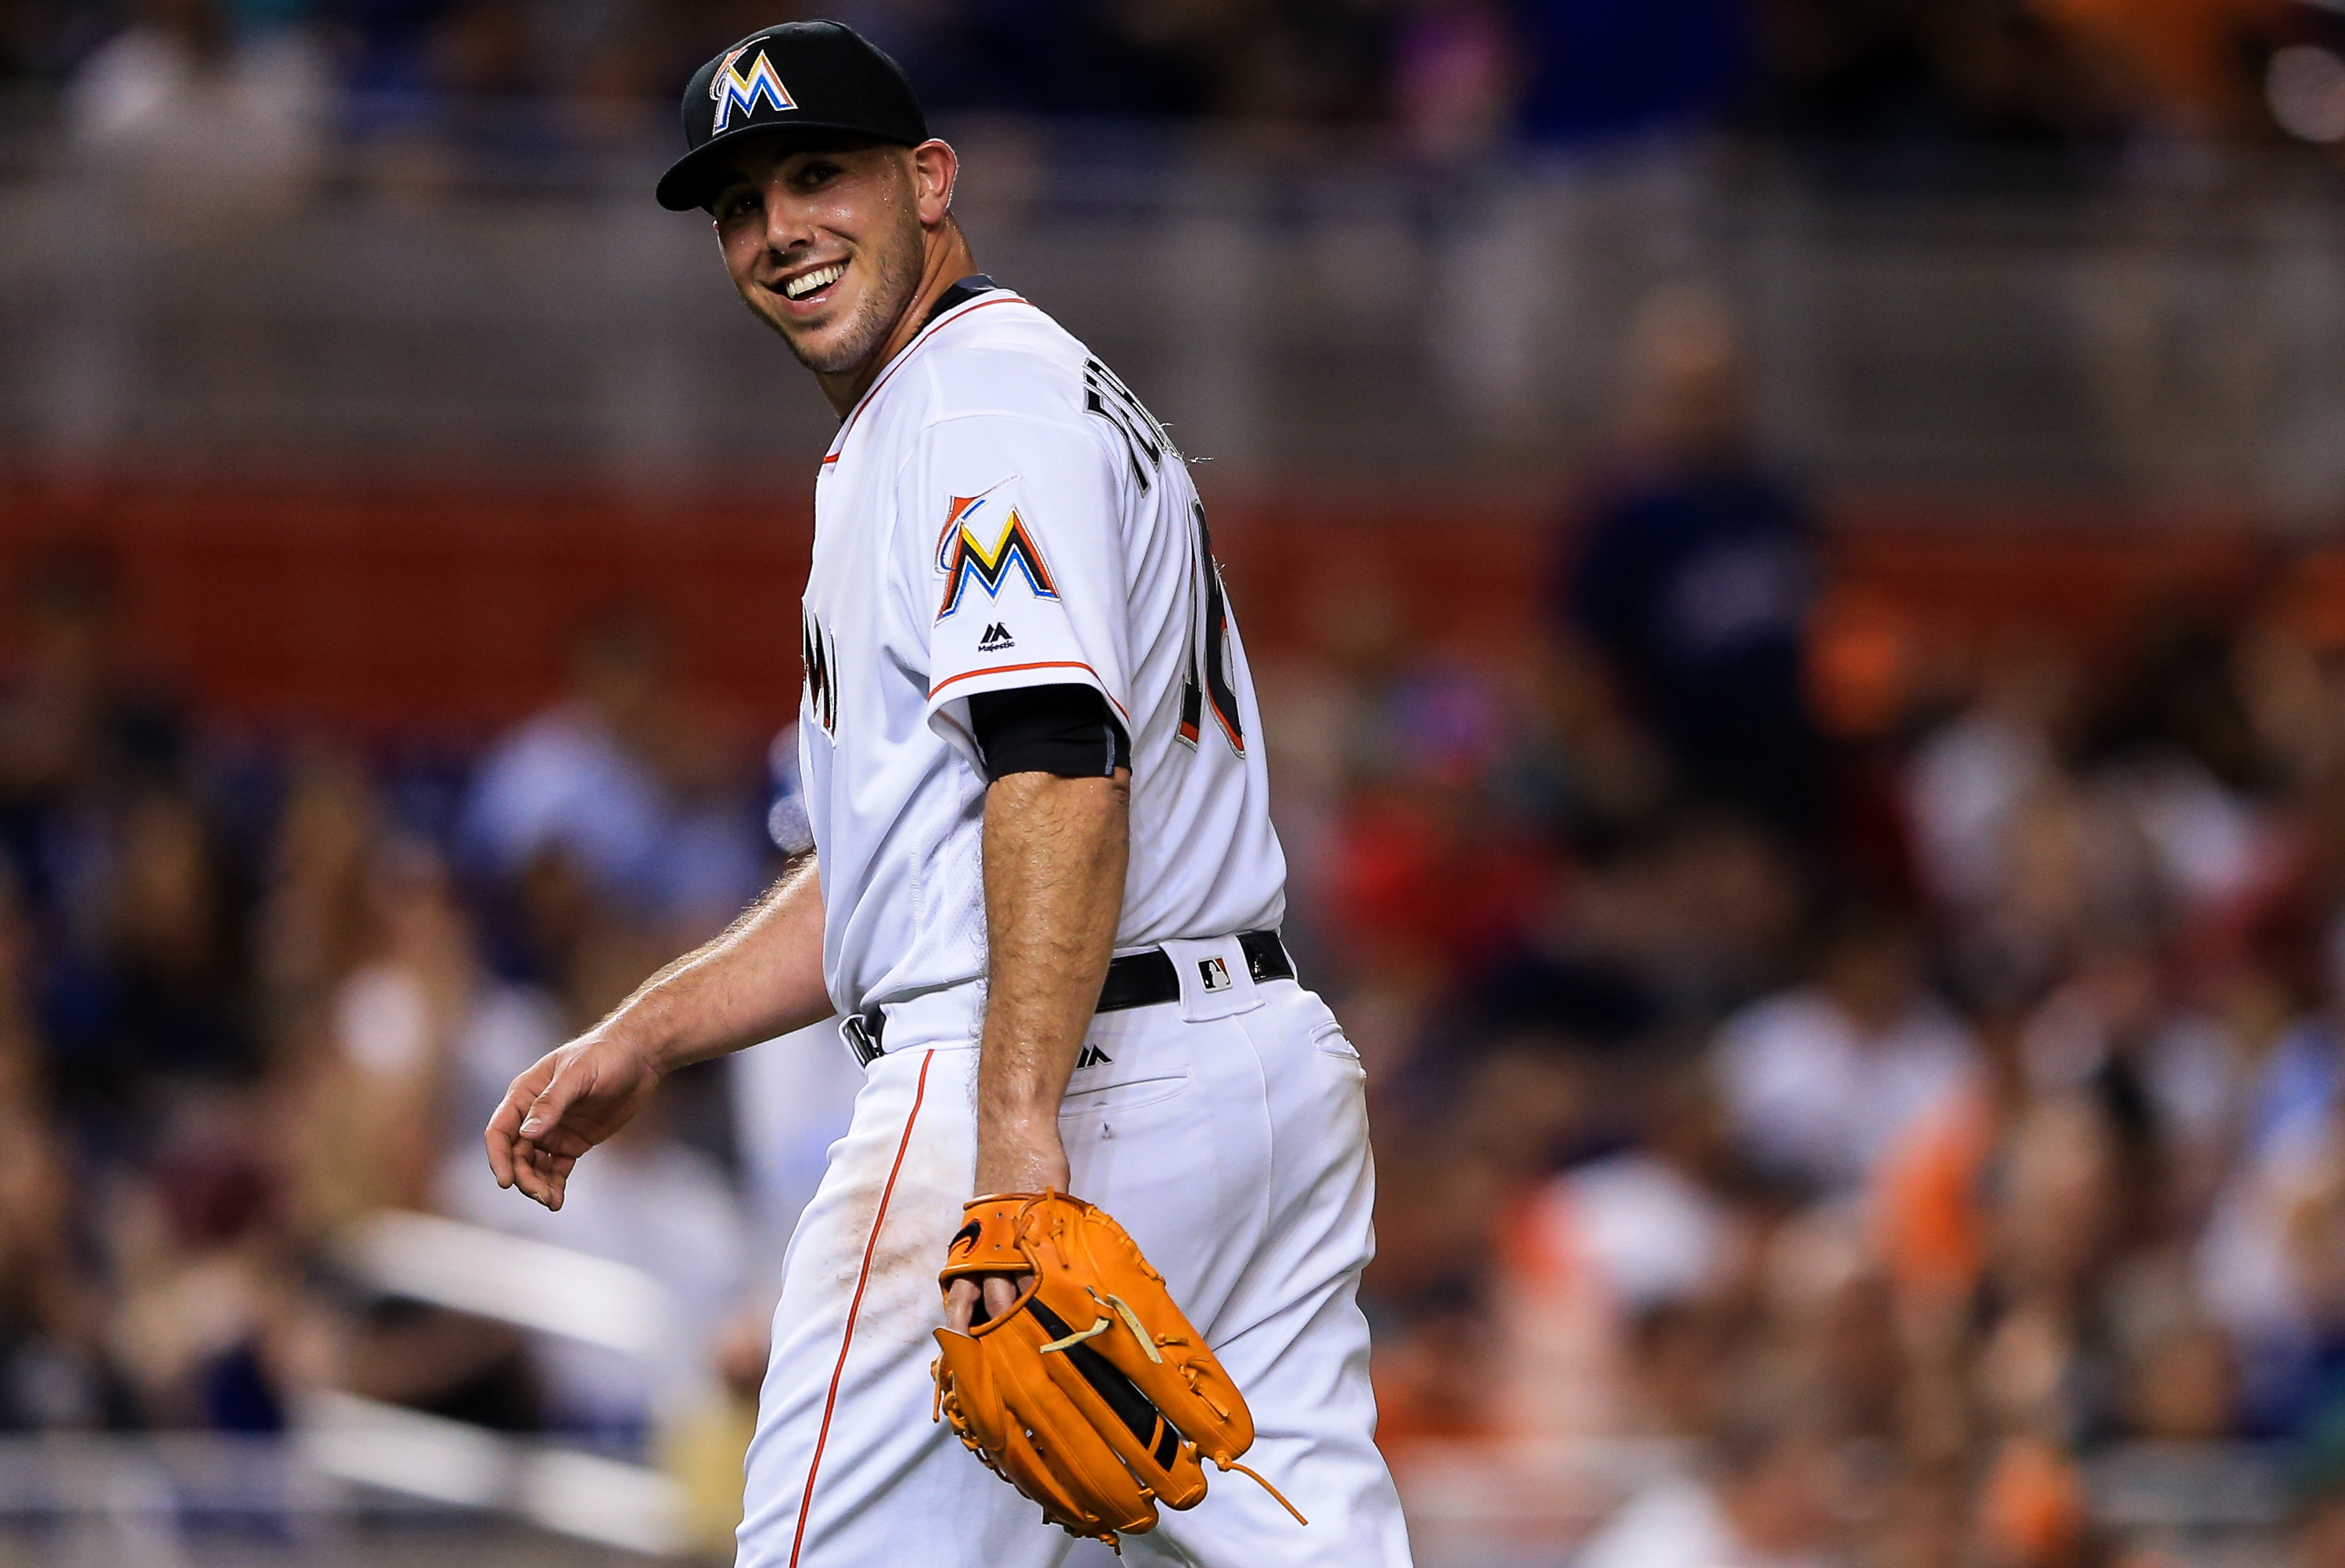 Miami Marlins remember Jose Fernandez in moving tribute at Marlins